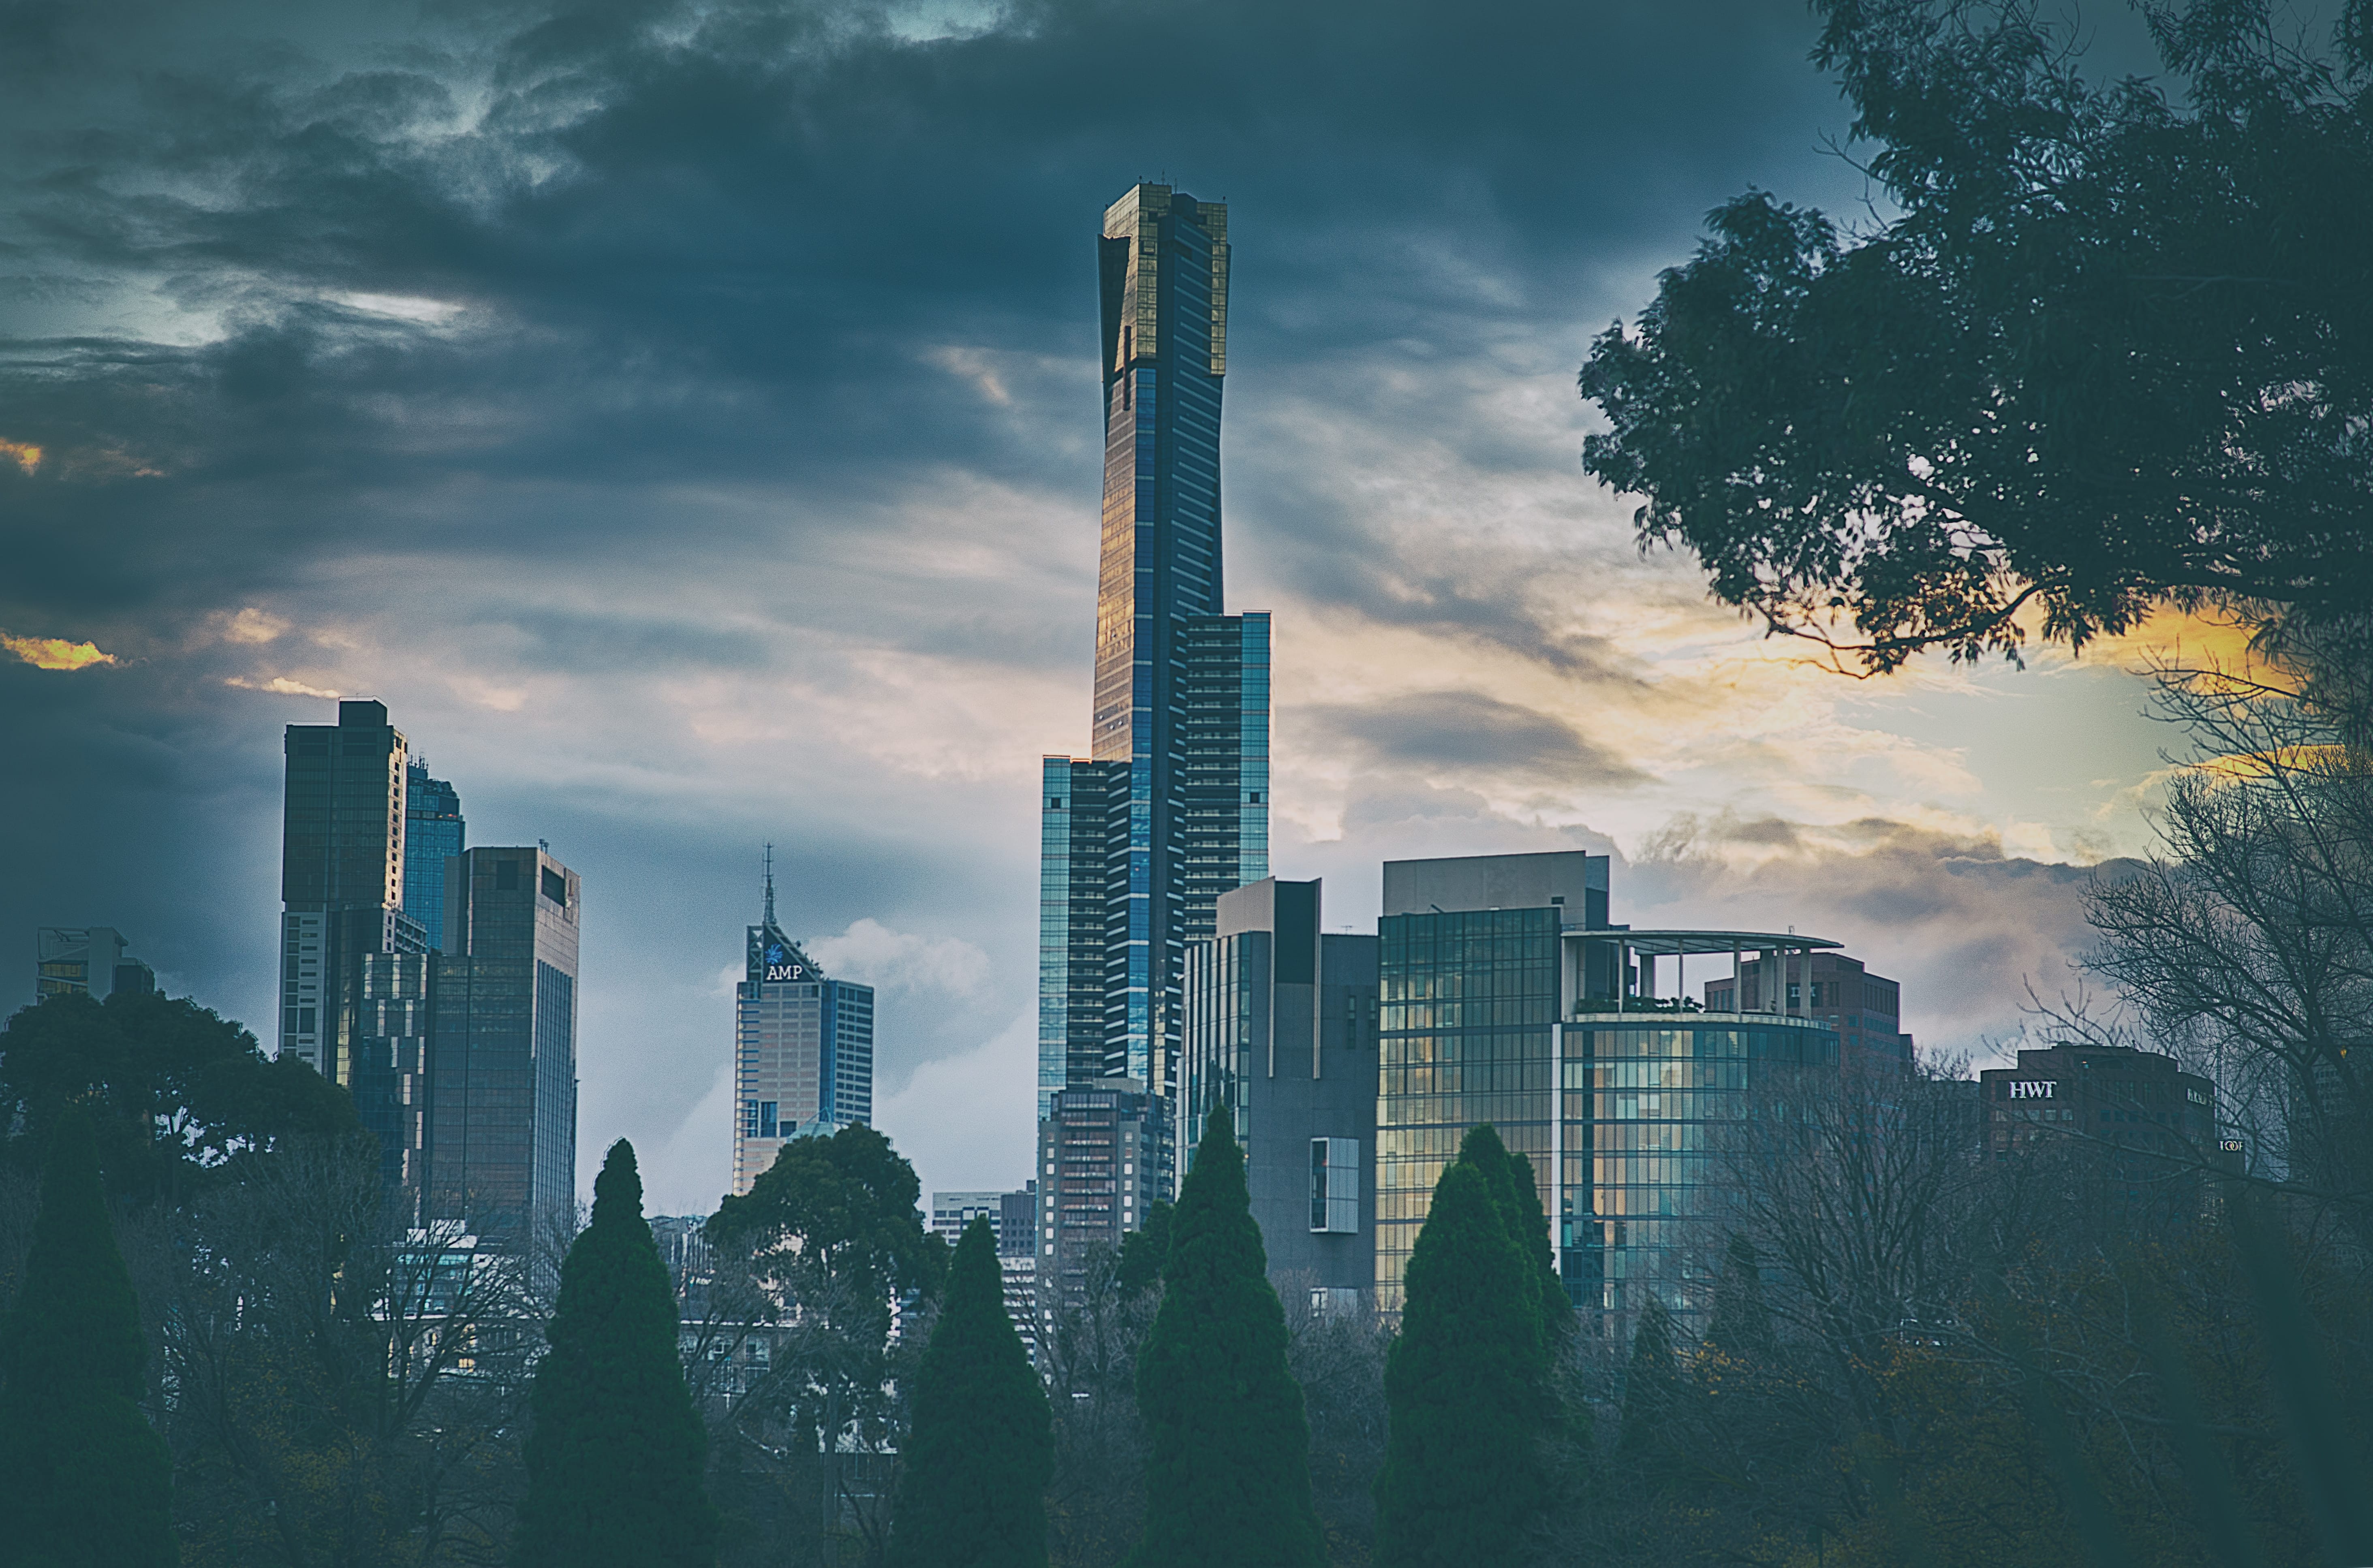 How many very cool days can we expect this winter in Melbourne? 